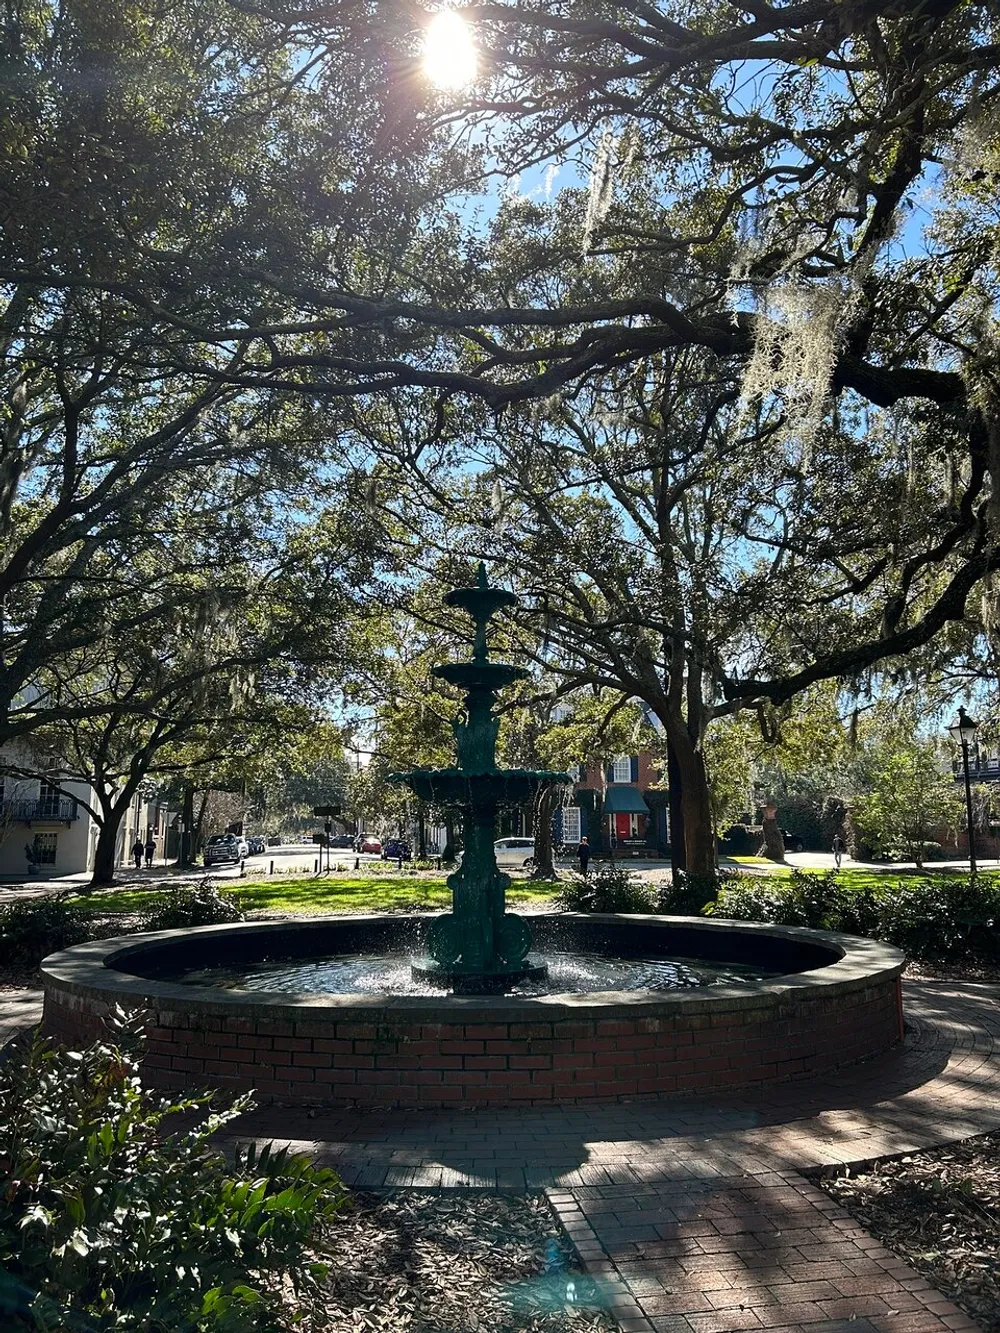 The image showcases a sunlit fountain surrounded by brick pavement under the shade of large trees draped with Spanish moss in a peaceful park setting